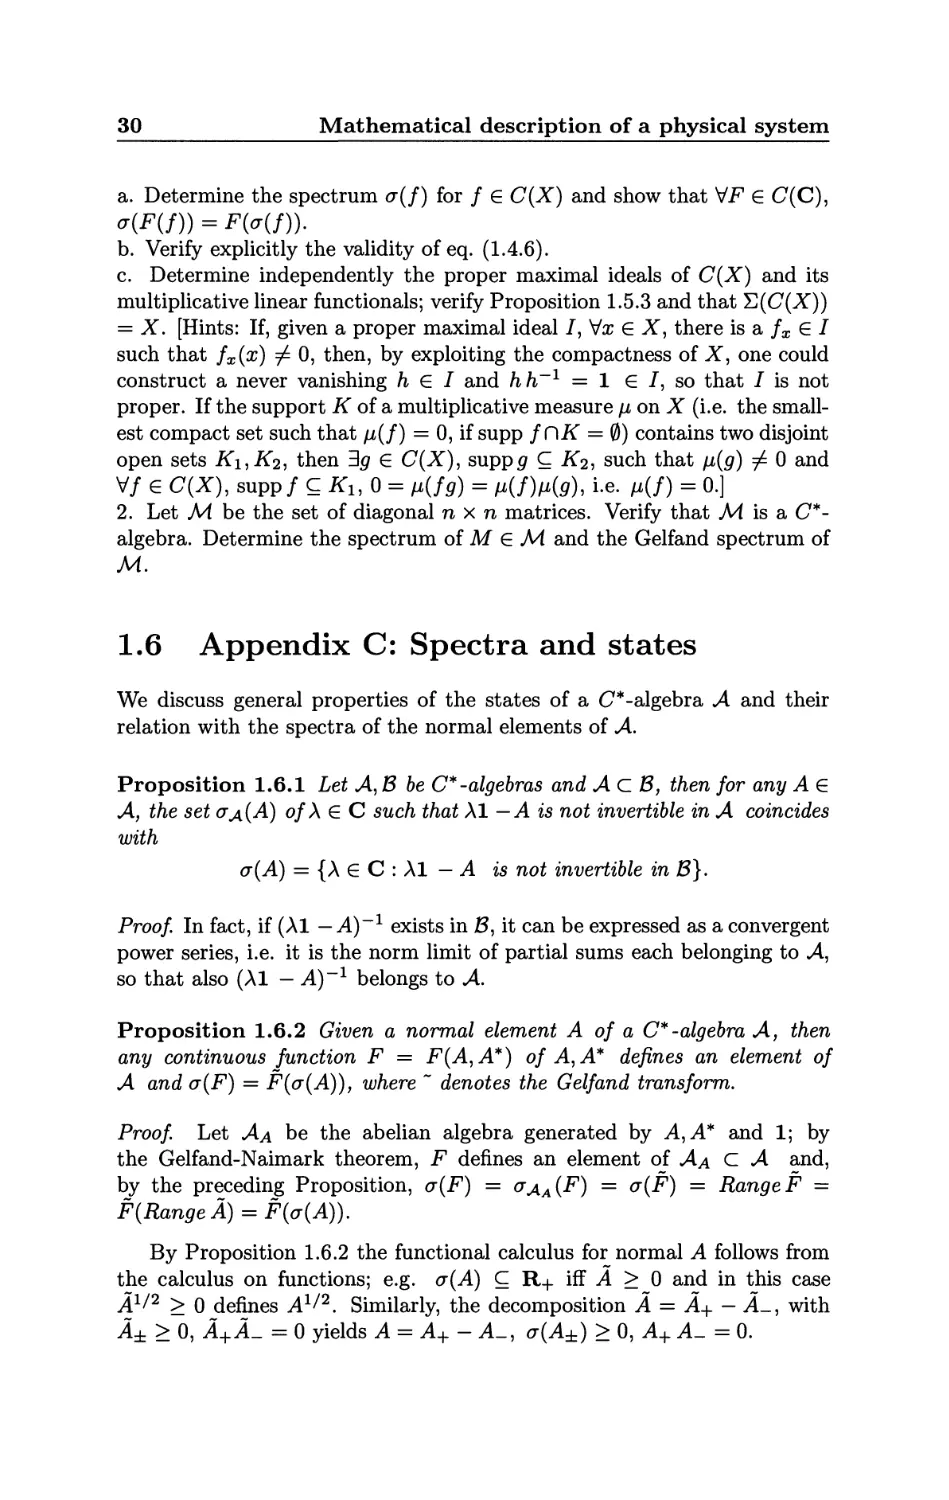 1.6 Appendix C: Spectra and states